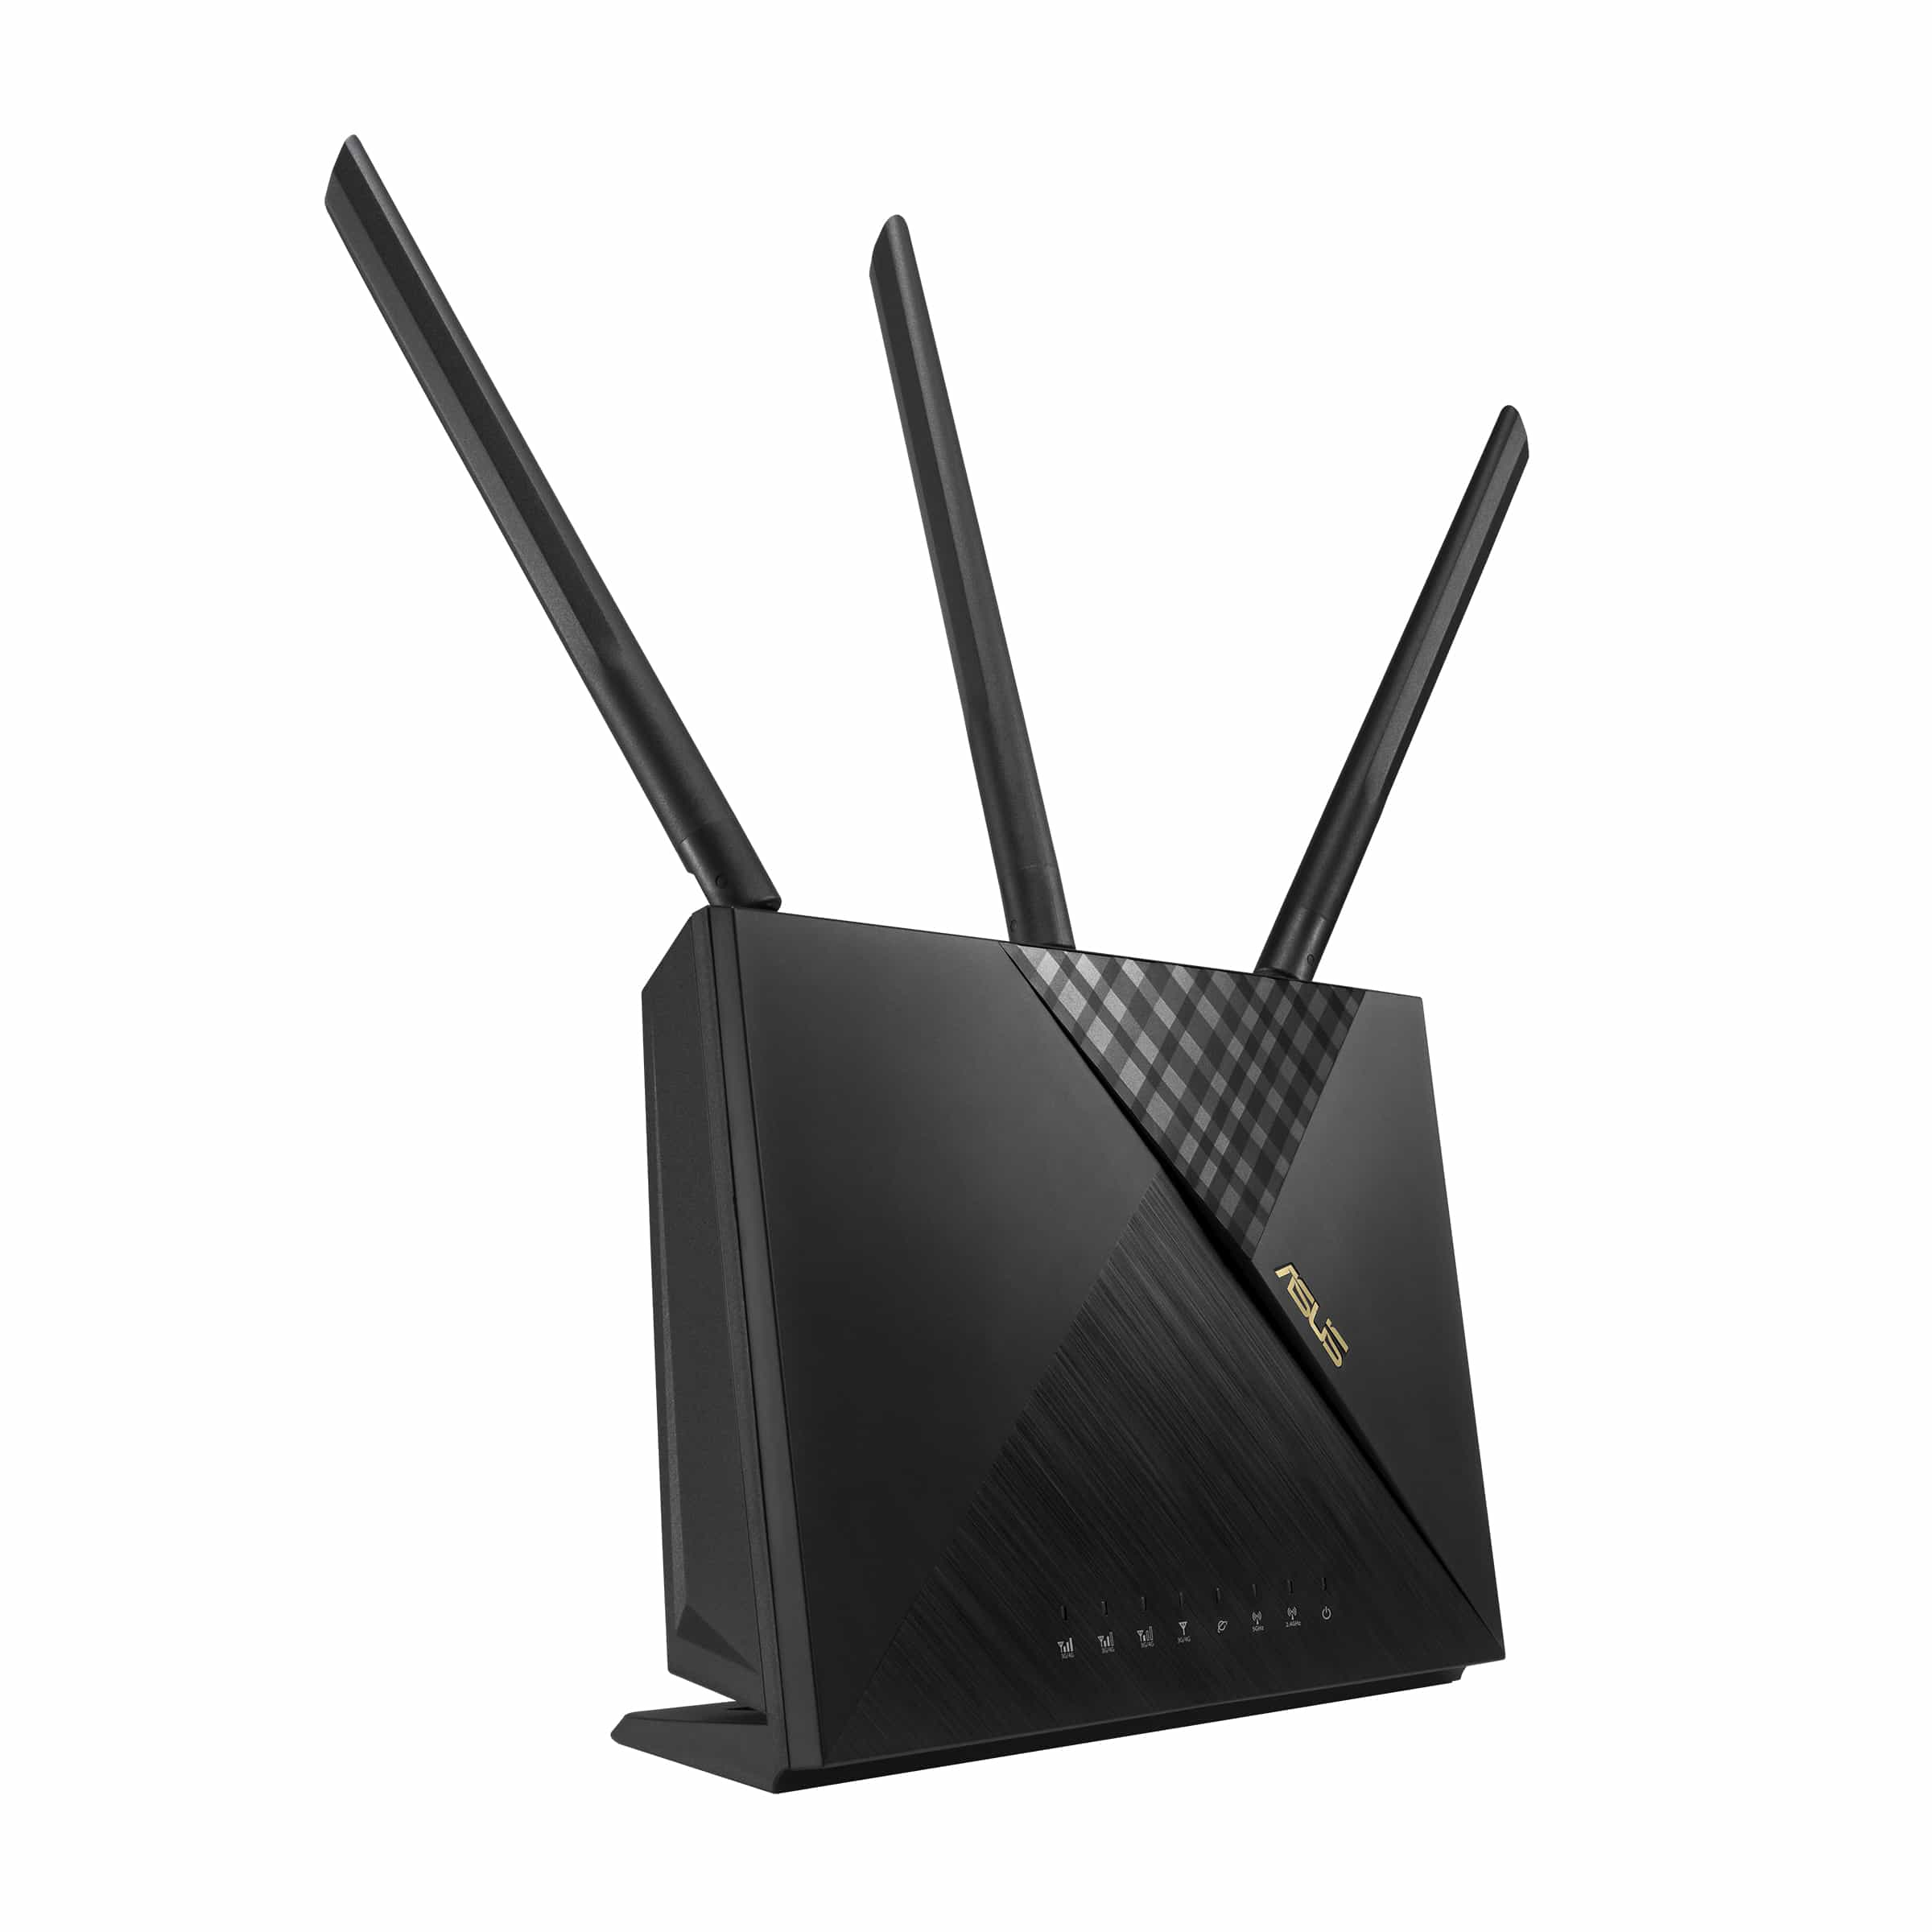 ASUS Wireless Router 4G-AX56 